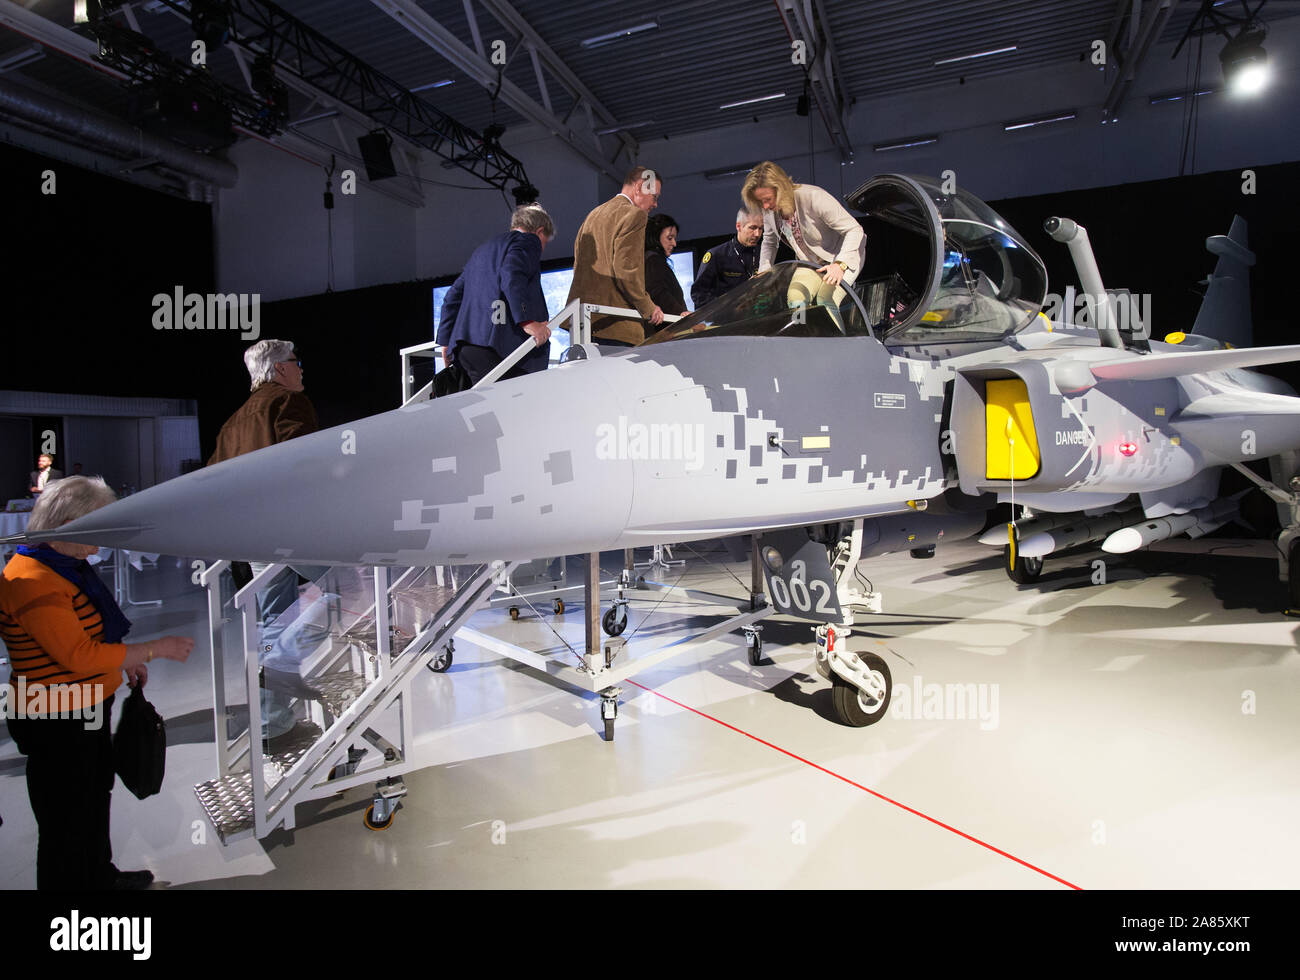 Visitors To Saab In Linkoping Who Are Allowed To Try A Model Of The New Jas 39 Gripen E The Production Of The Next Swedish Fighter Aircraft The First Gripen E Is